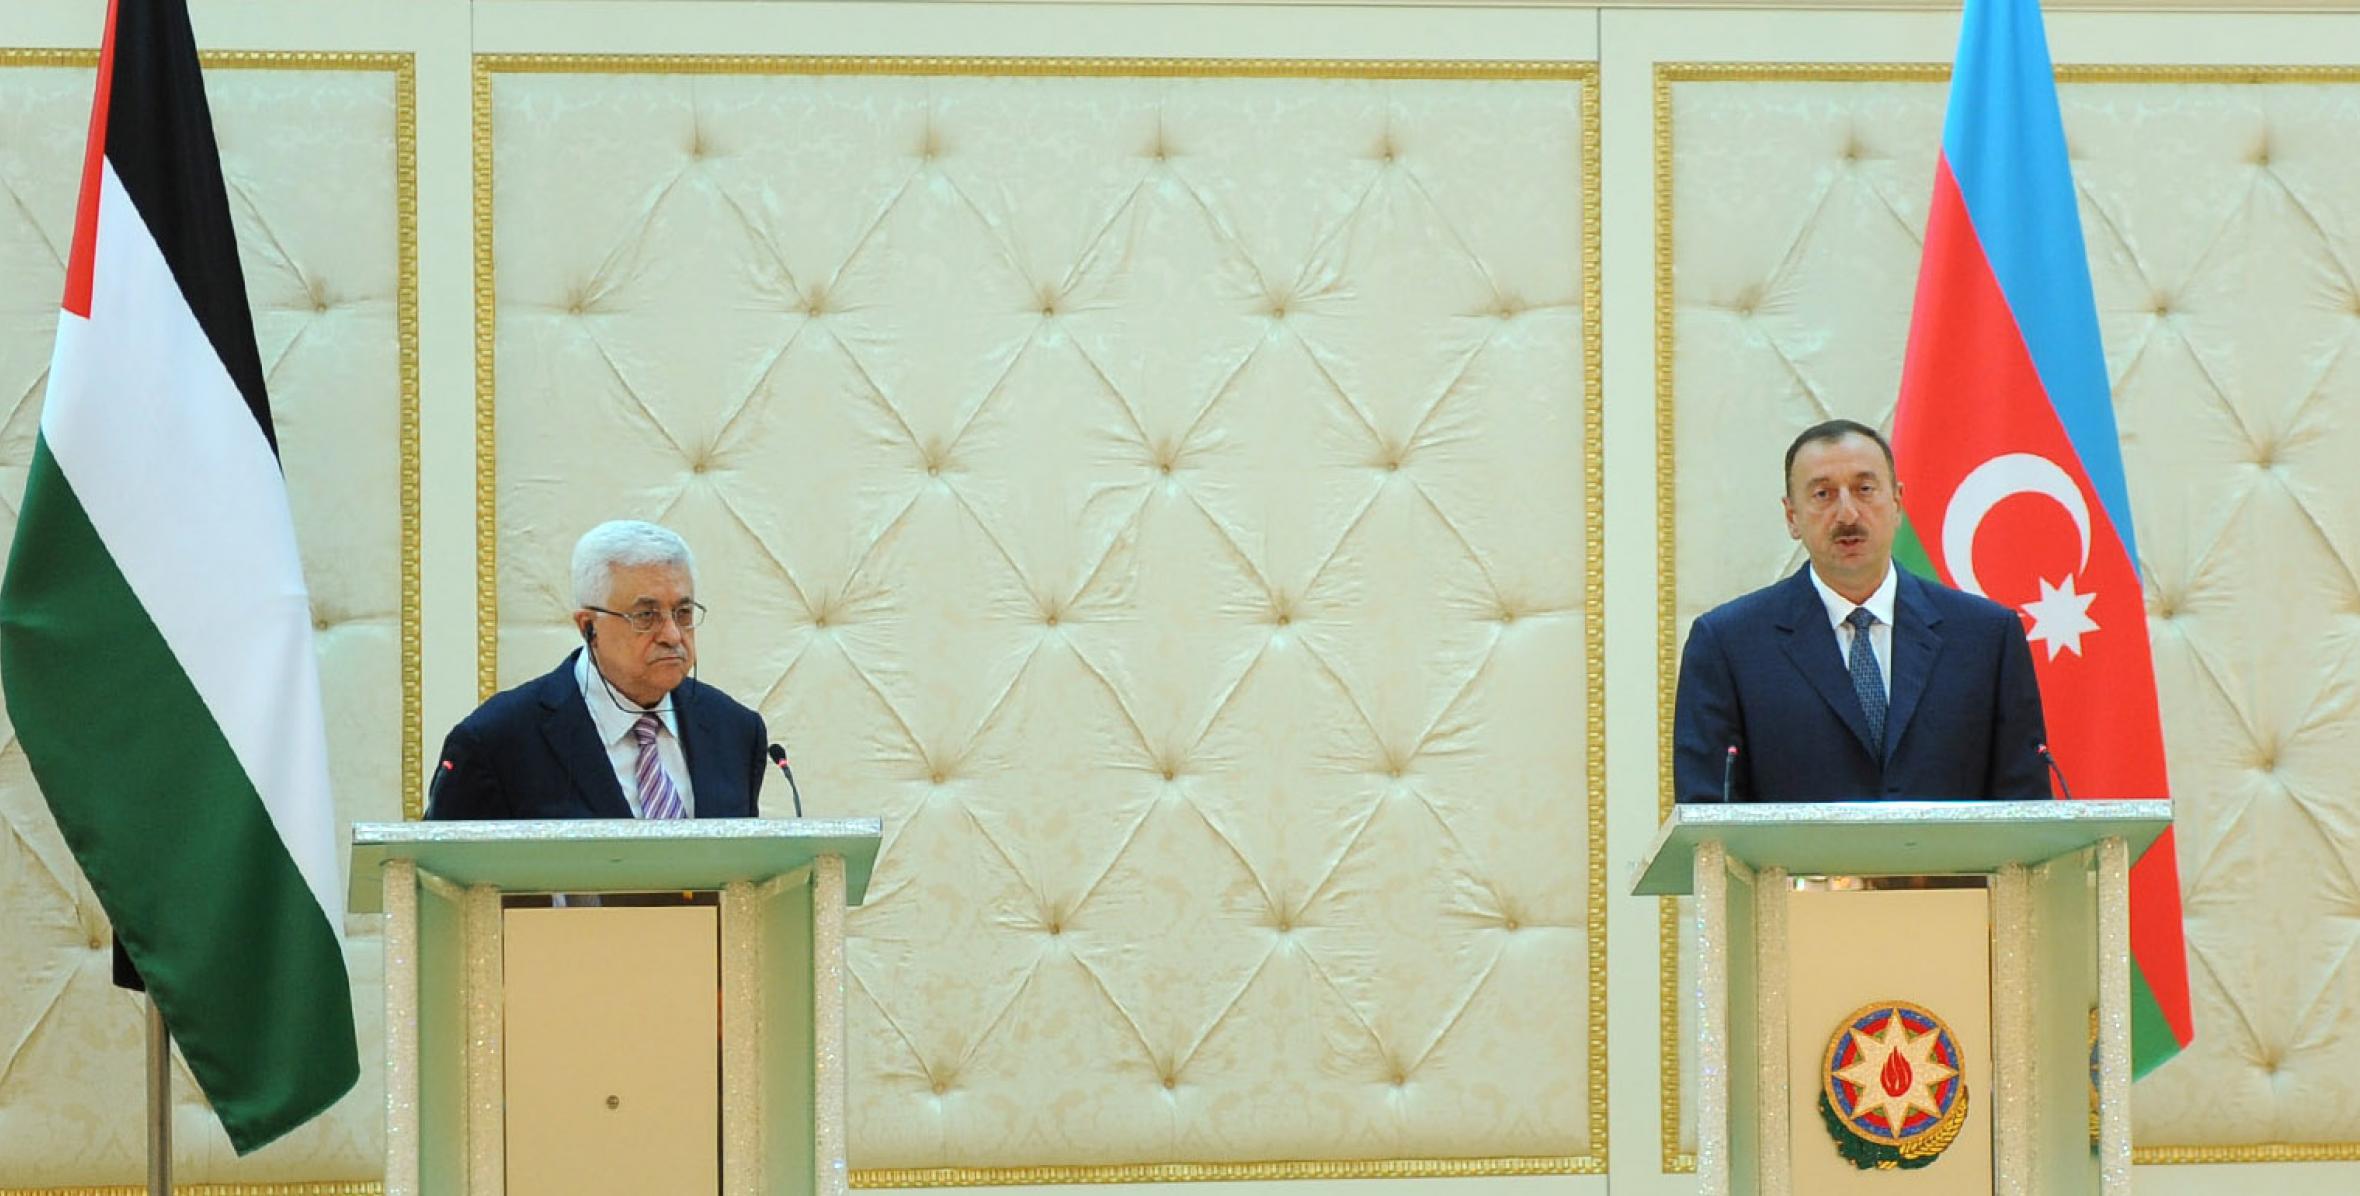 Presidents of Azerbaijan and Palestine made statements for the press